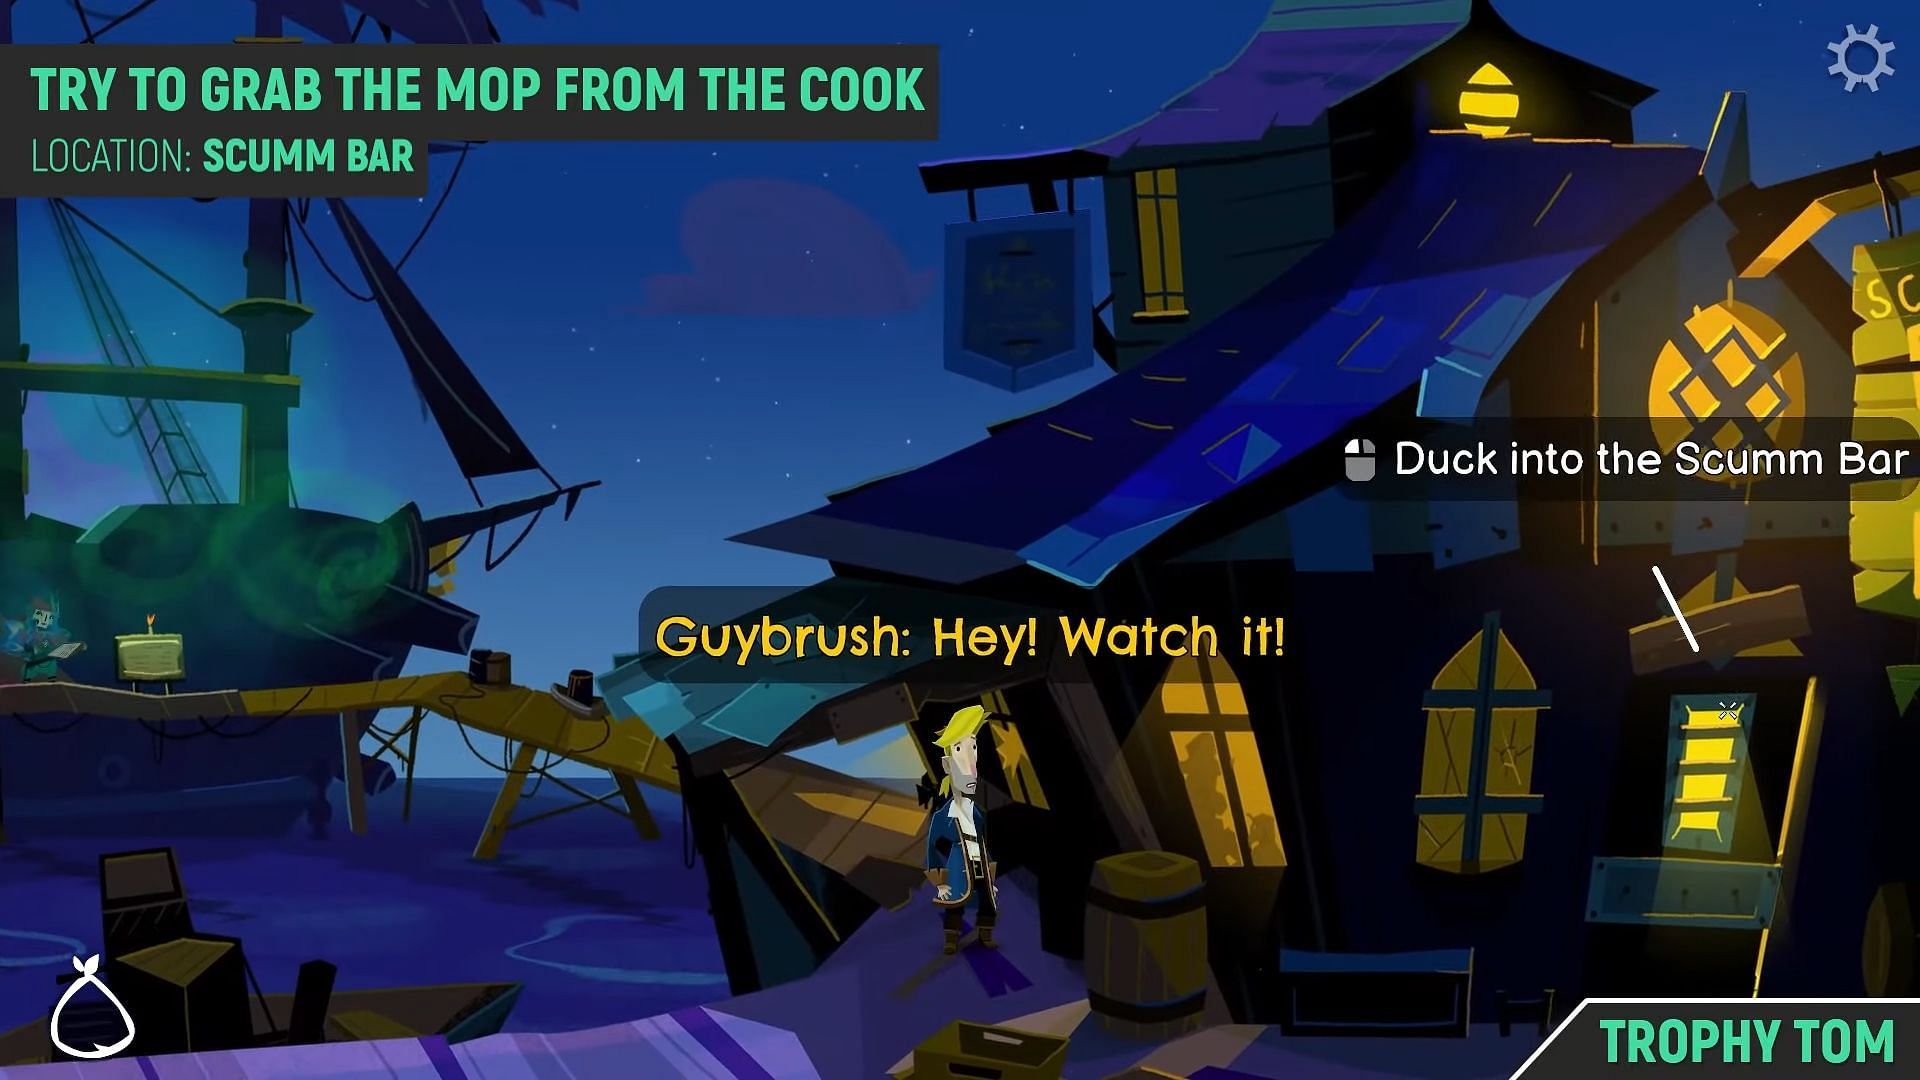 Grab mop from chef (Image via Trophy Tom)